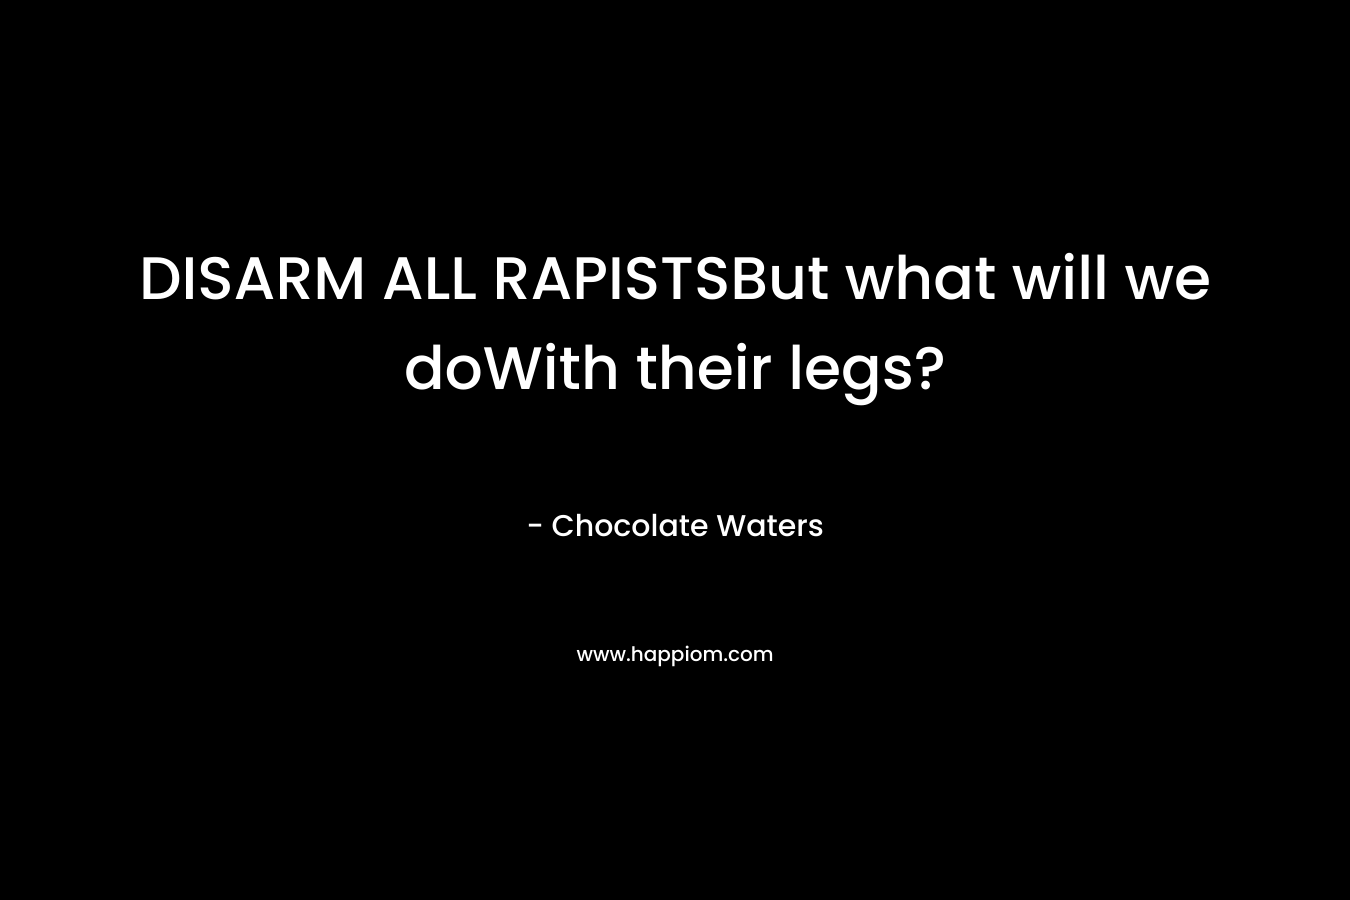 DISARM ALL RAPISTSBut what will we doWith their legs?